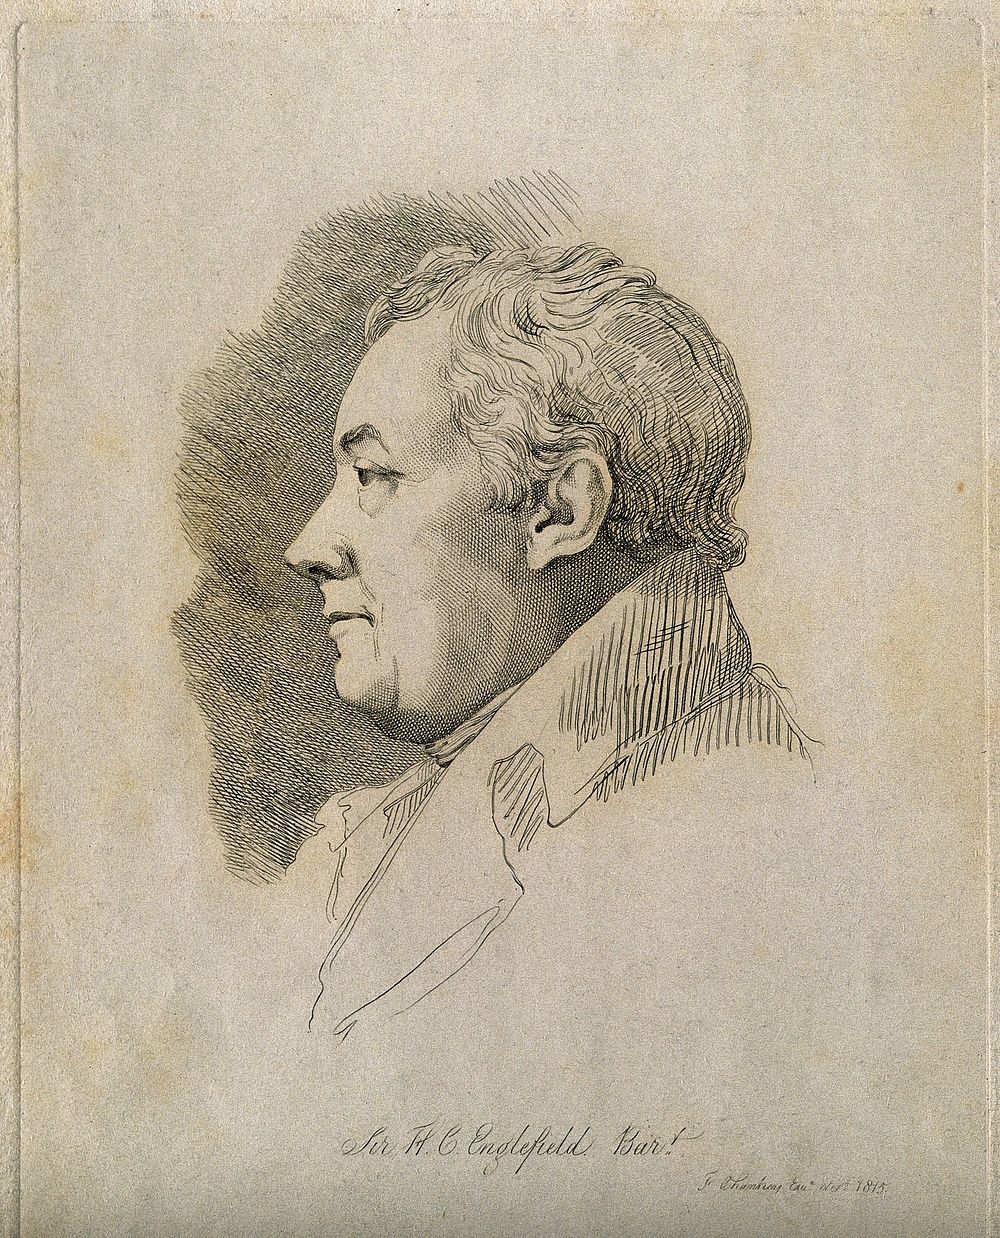 Sir Henry Charles Englefield. Etching by Mrs D. Turner after F. Chantrey, 1815.